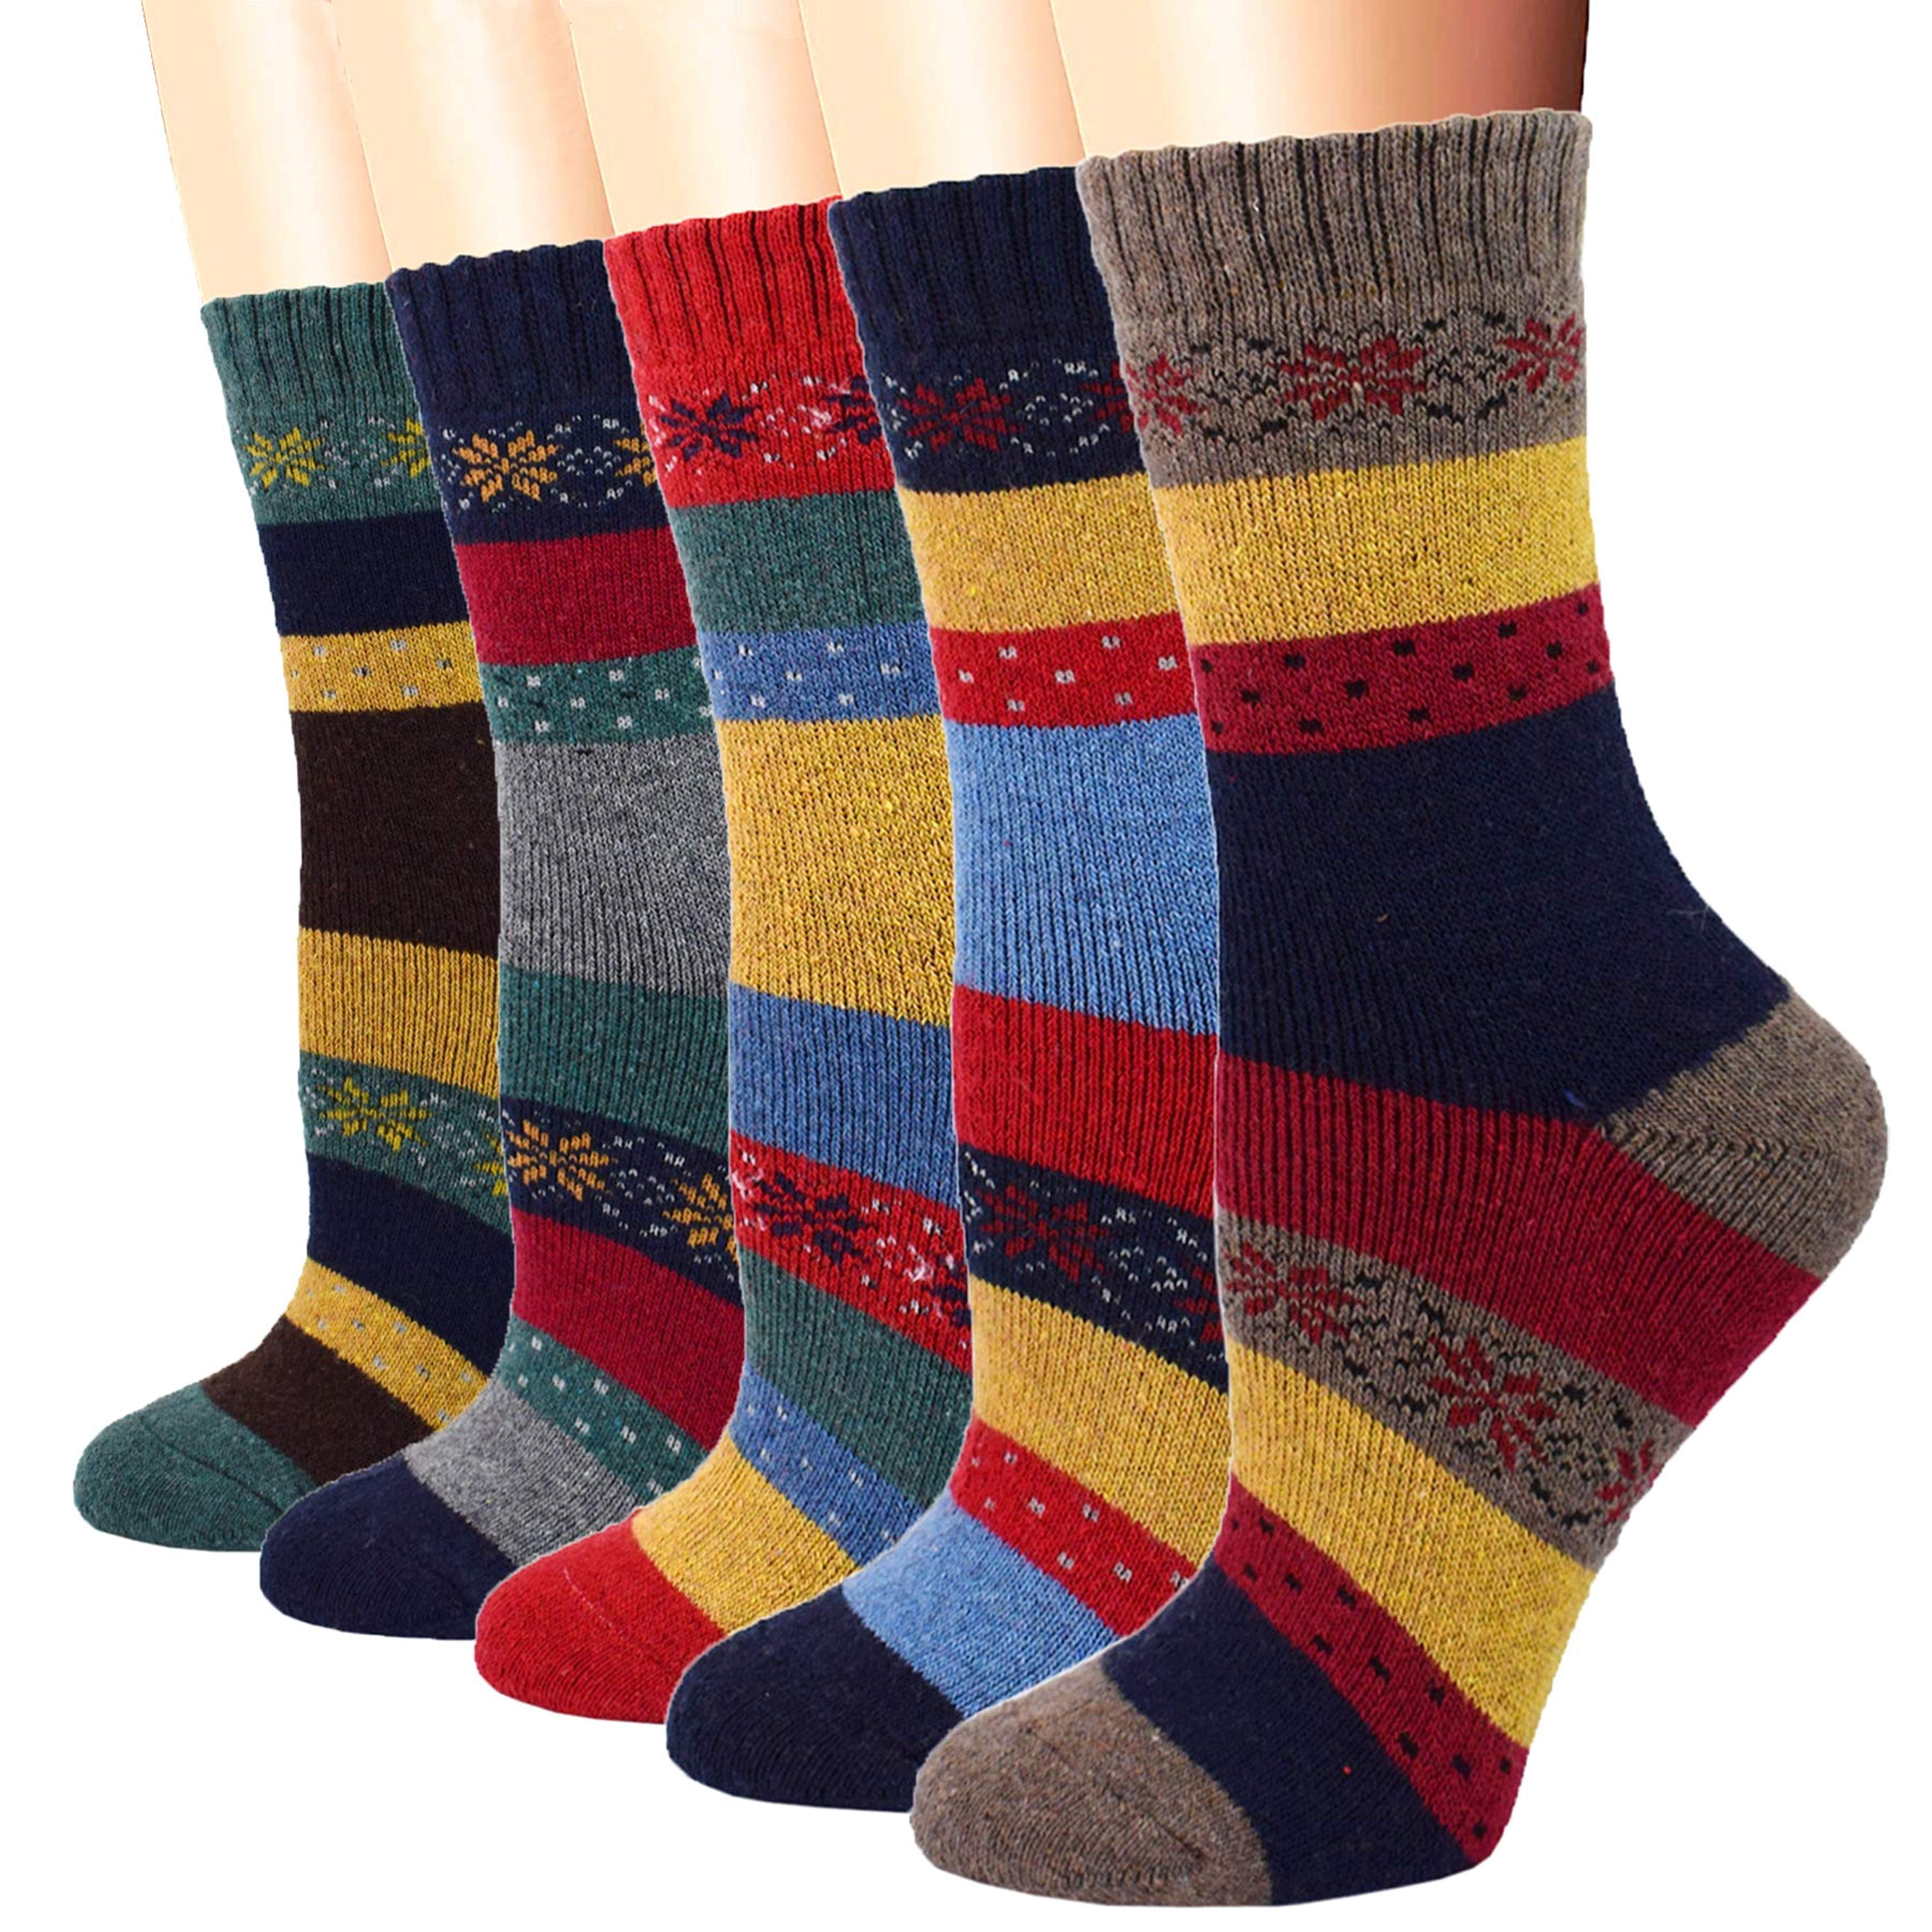 30 x Women’s Very Warm Socks Winter Cotton Rich Thick Everyday Different Pattern 